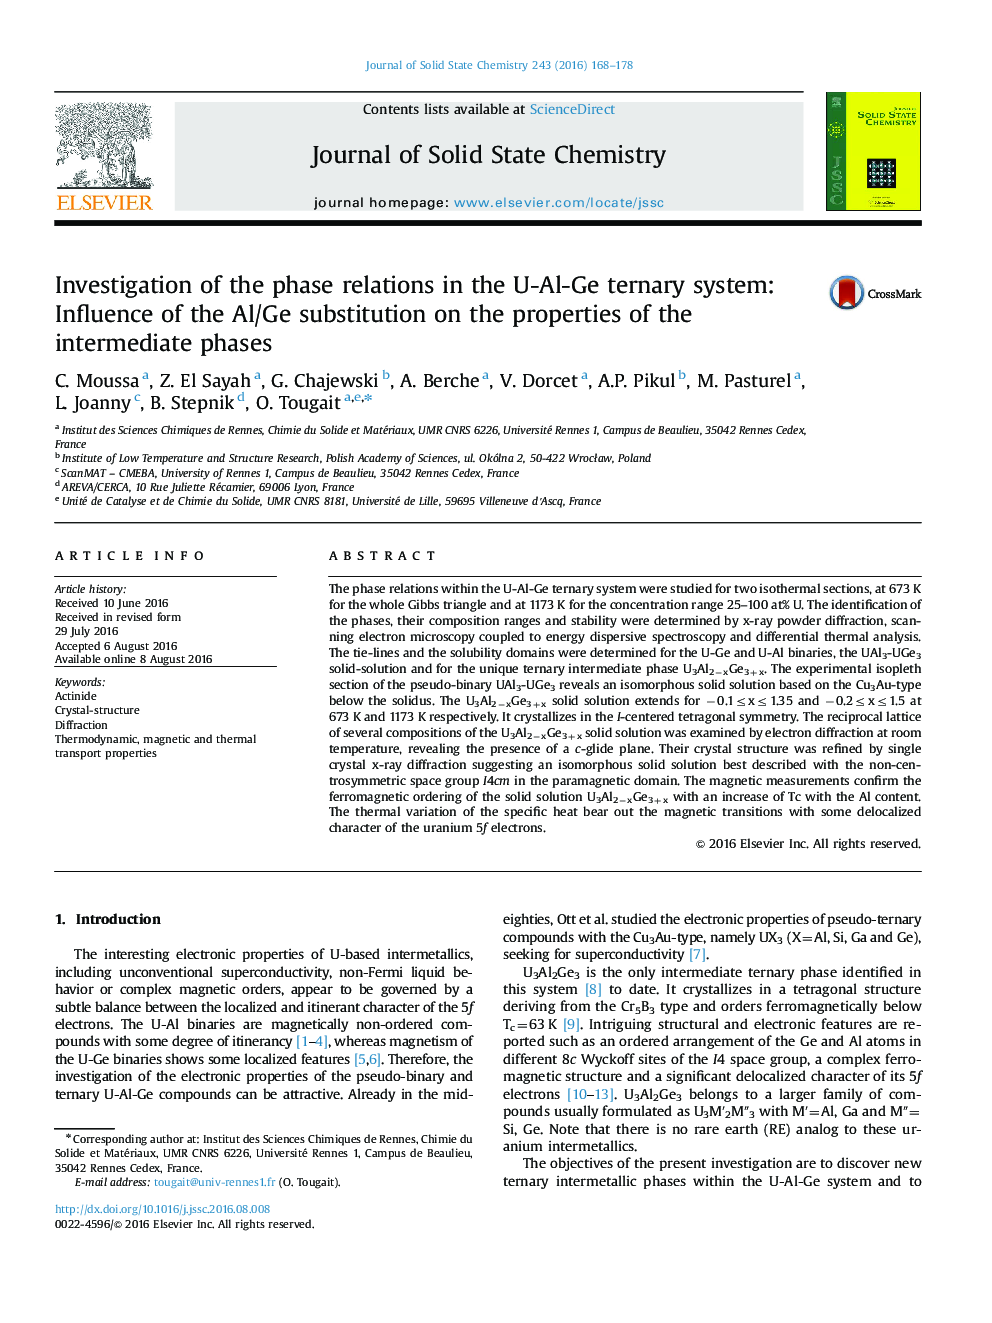 Investigation of the phase relations in the U-Al-Ge ternary system: Influence of the Al/Ge substitution on the properties of the intermediate phases